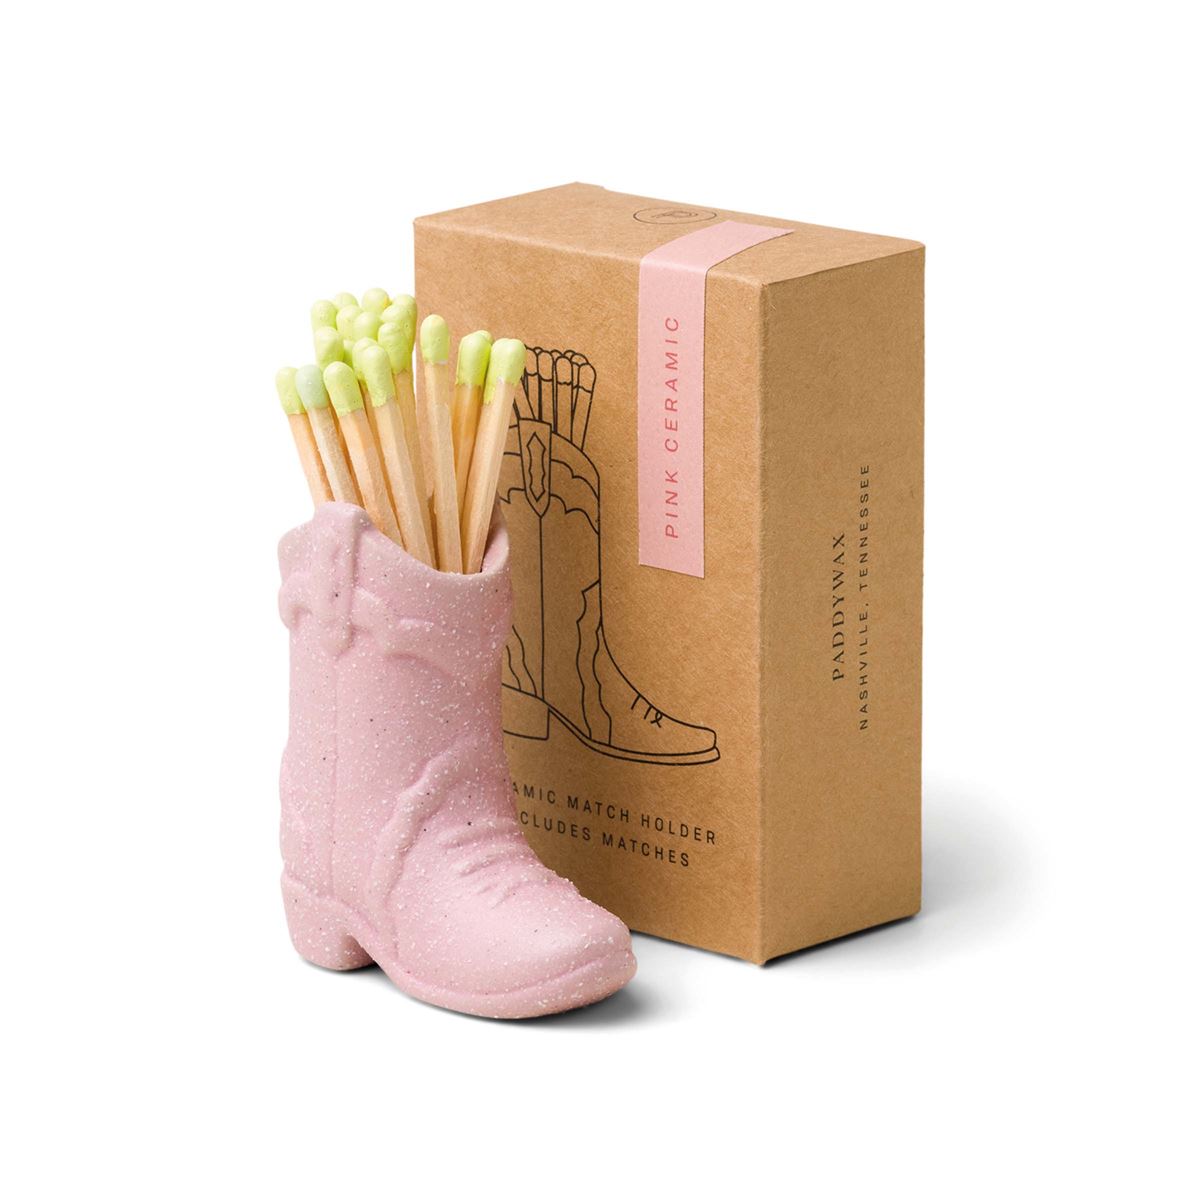 pink ceramic cowboy boot match holder with lime green safety matches by Paddywax.